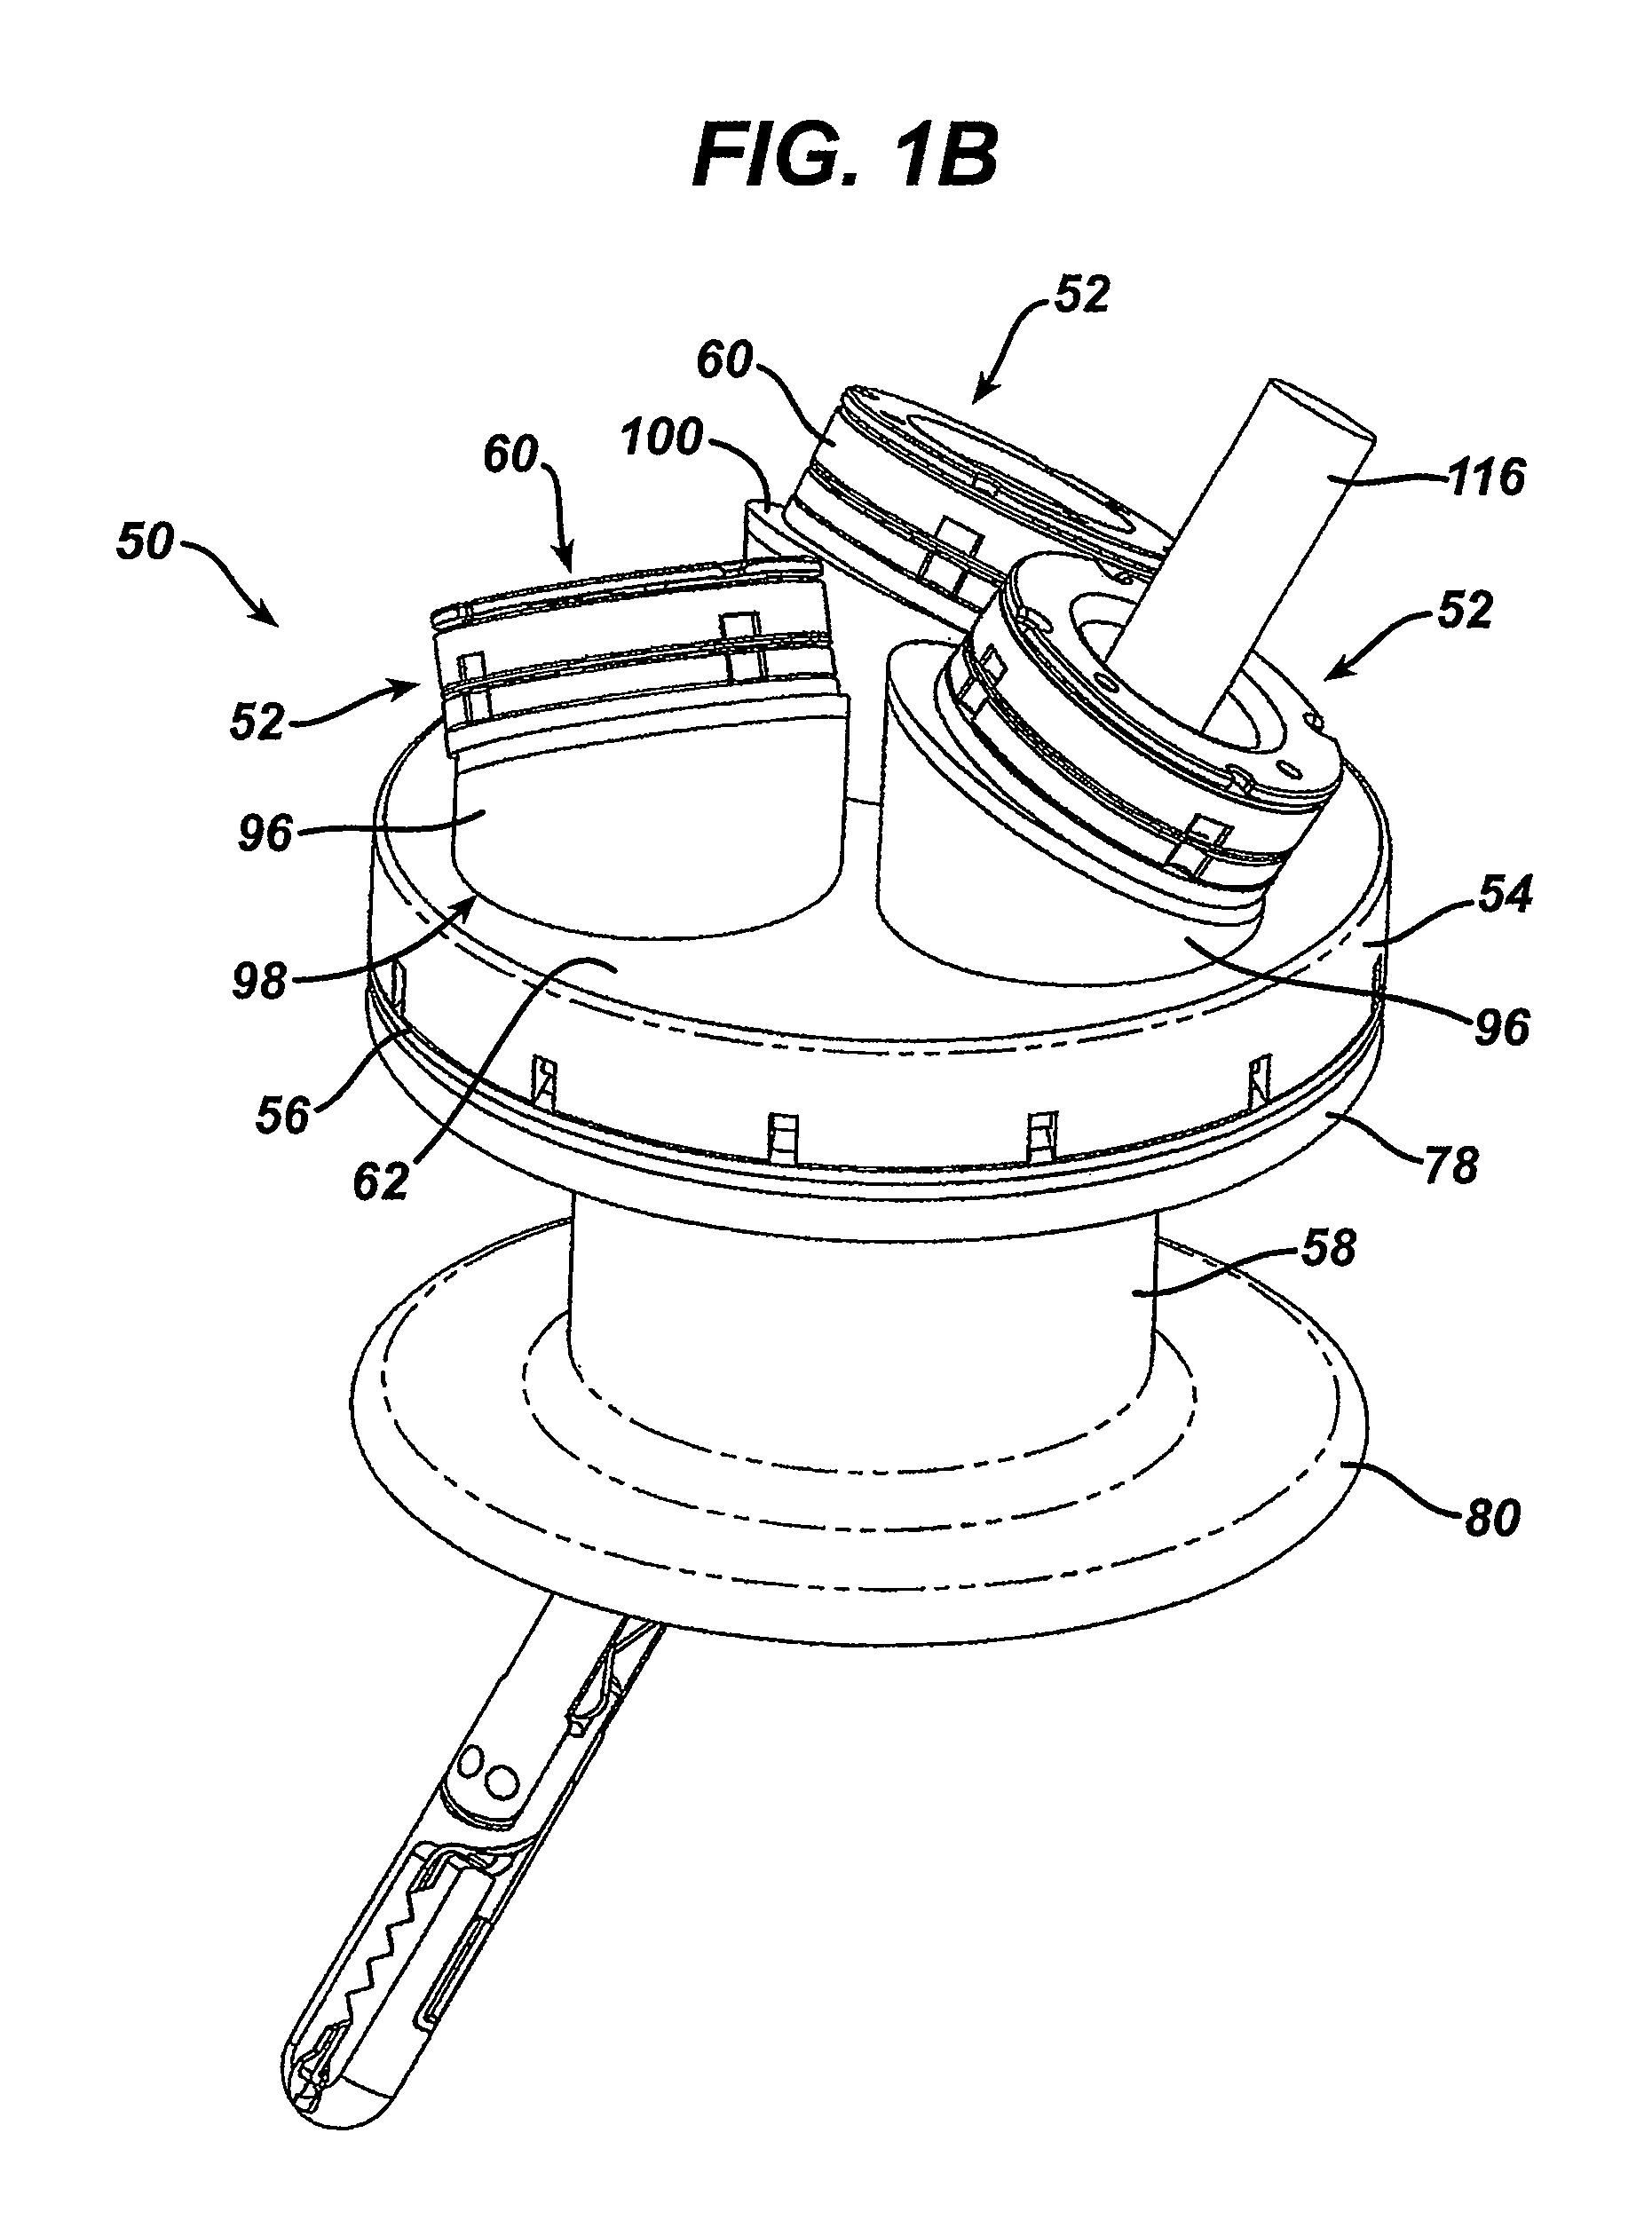 Surgical access device with protective element